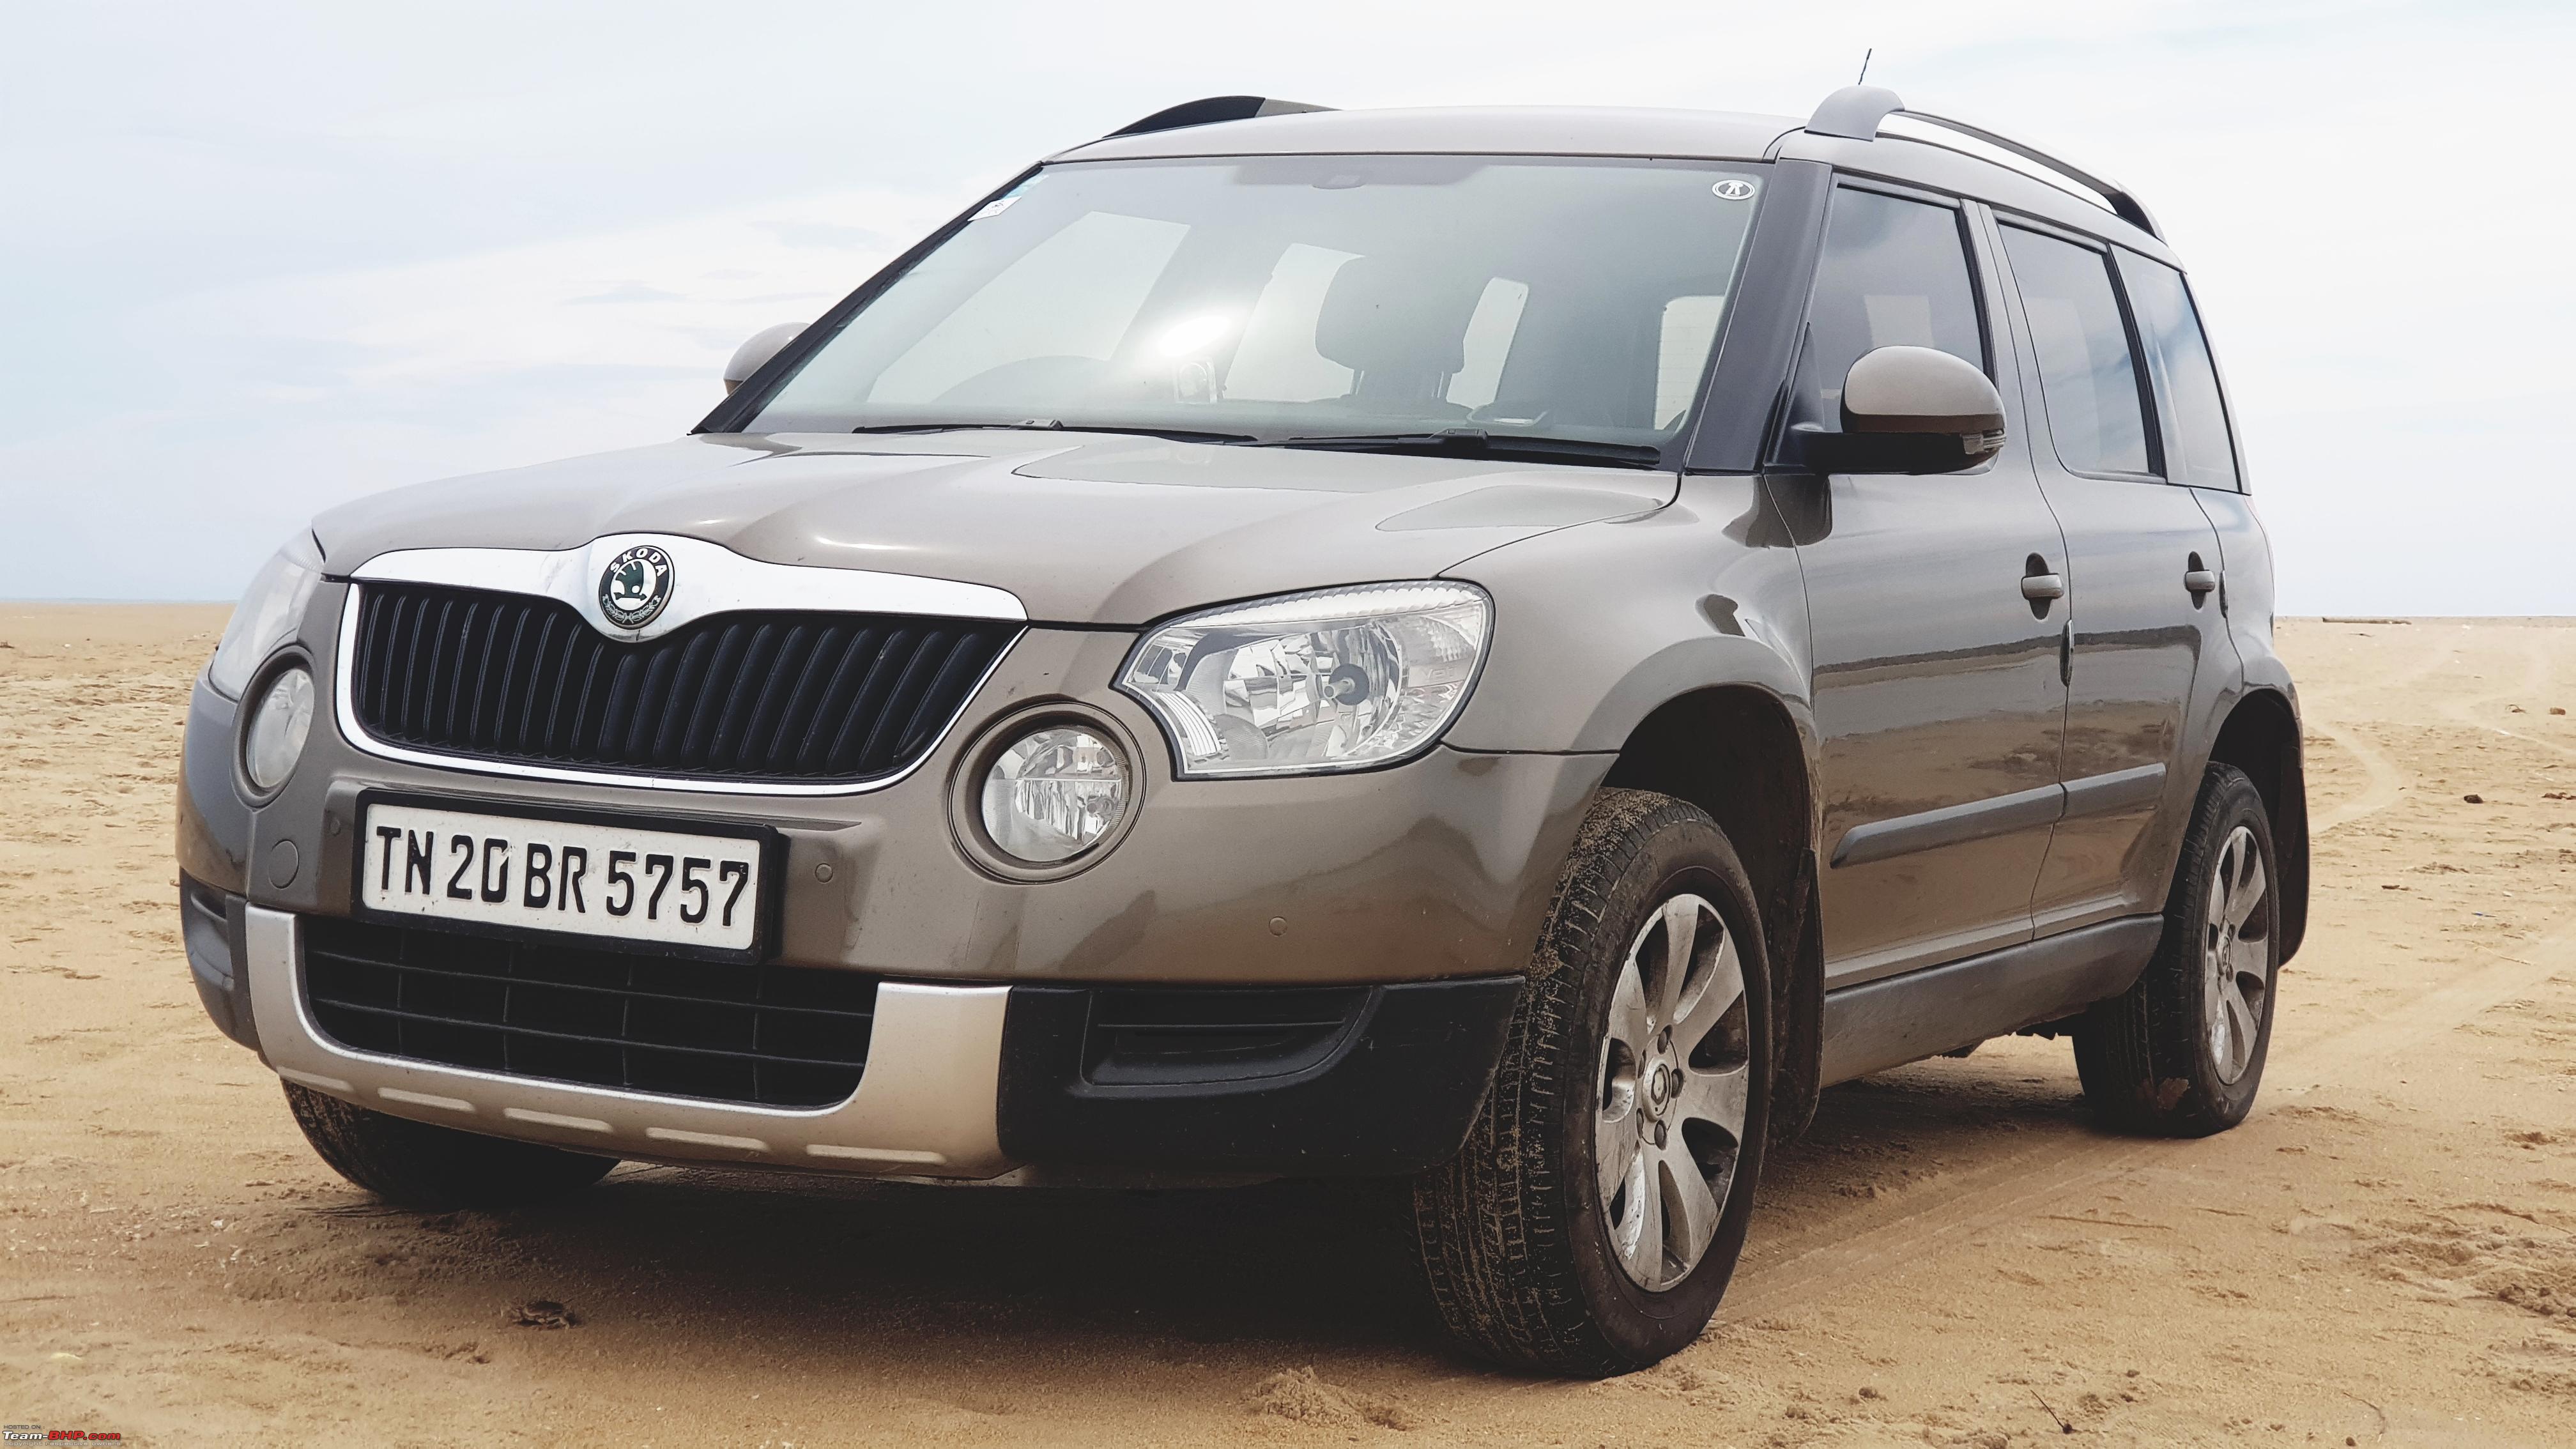 Skoda Yeti : Review, Price & Pictures - Page 144 - Team-BHP